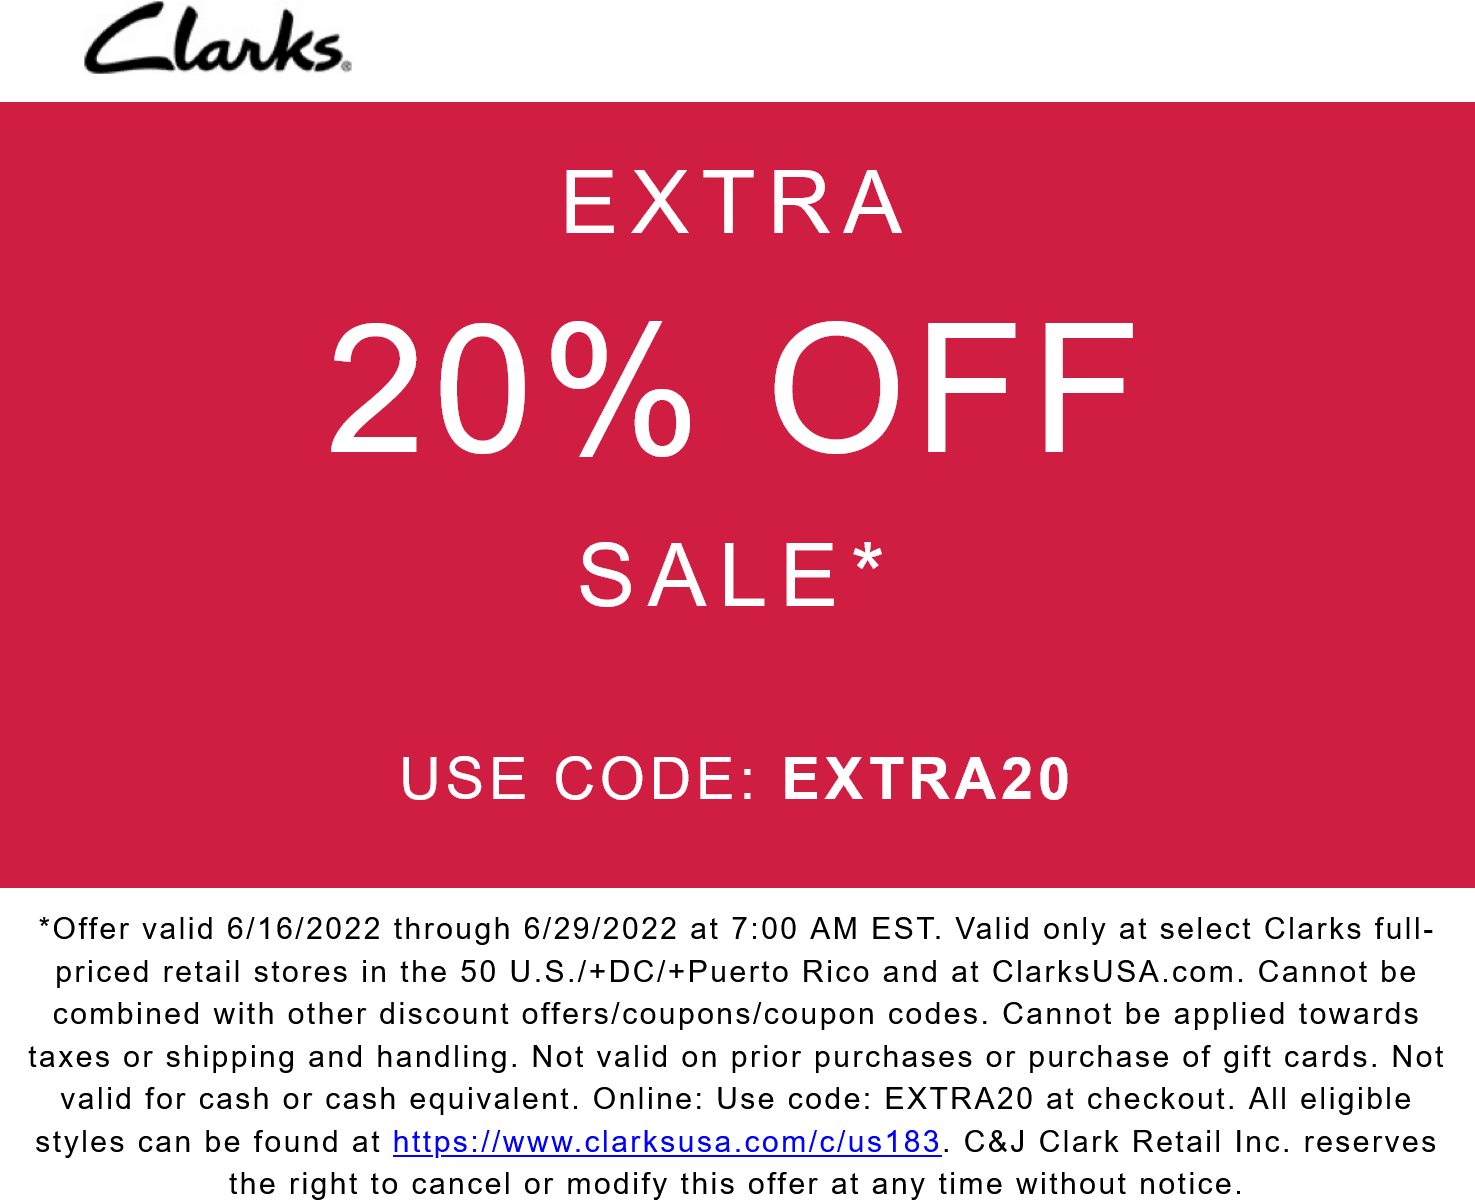 Clarks stores Coupon  Extra 20% off sale items at Clarks shoes via promo code EXTRA20 #clarks 